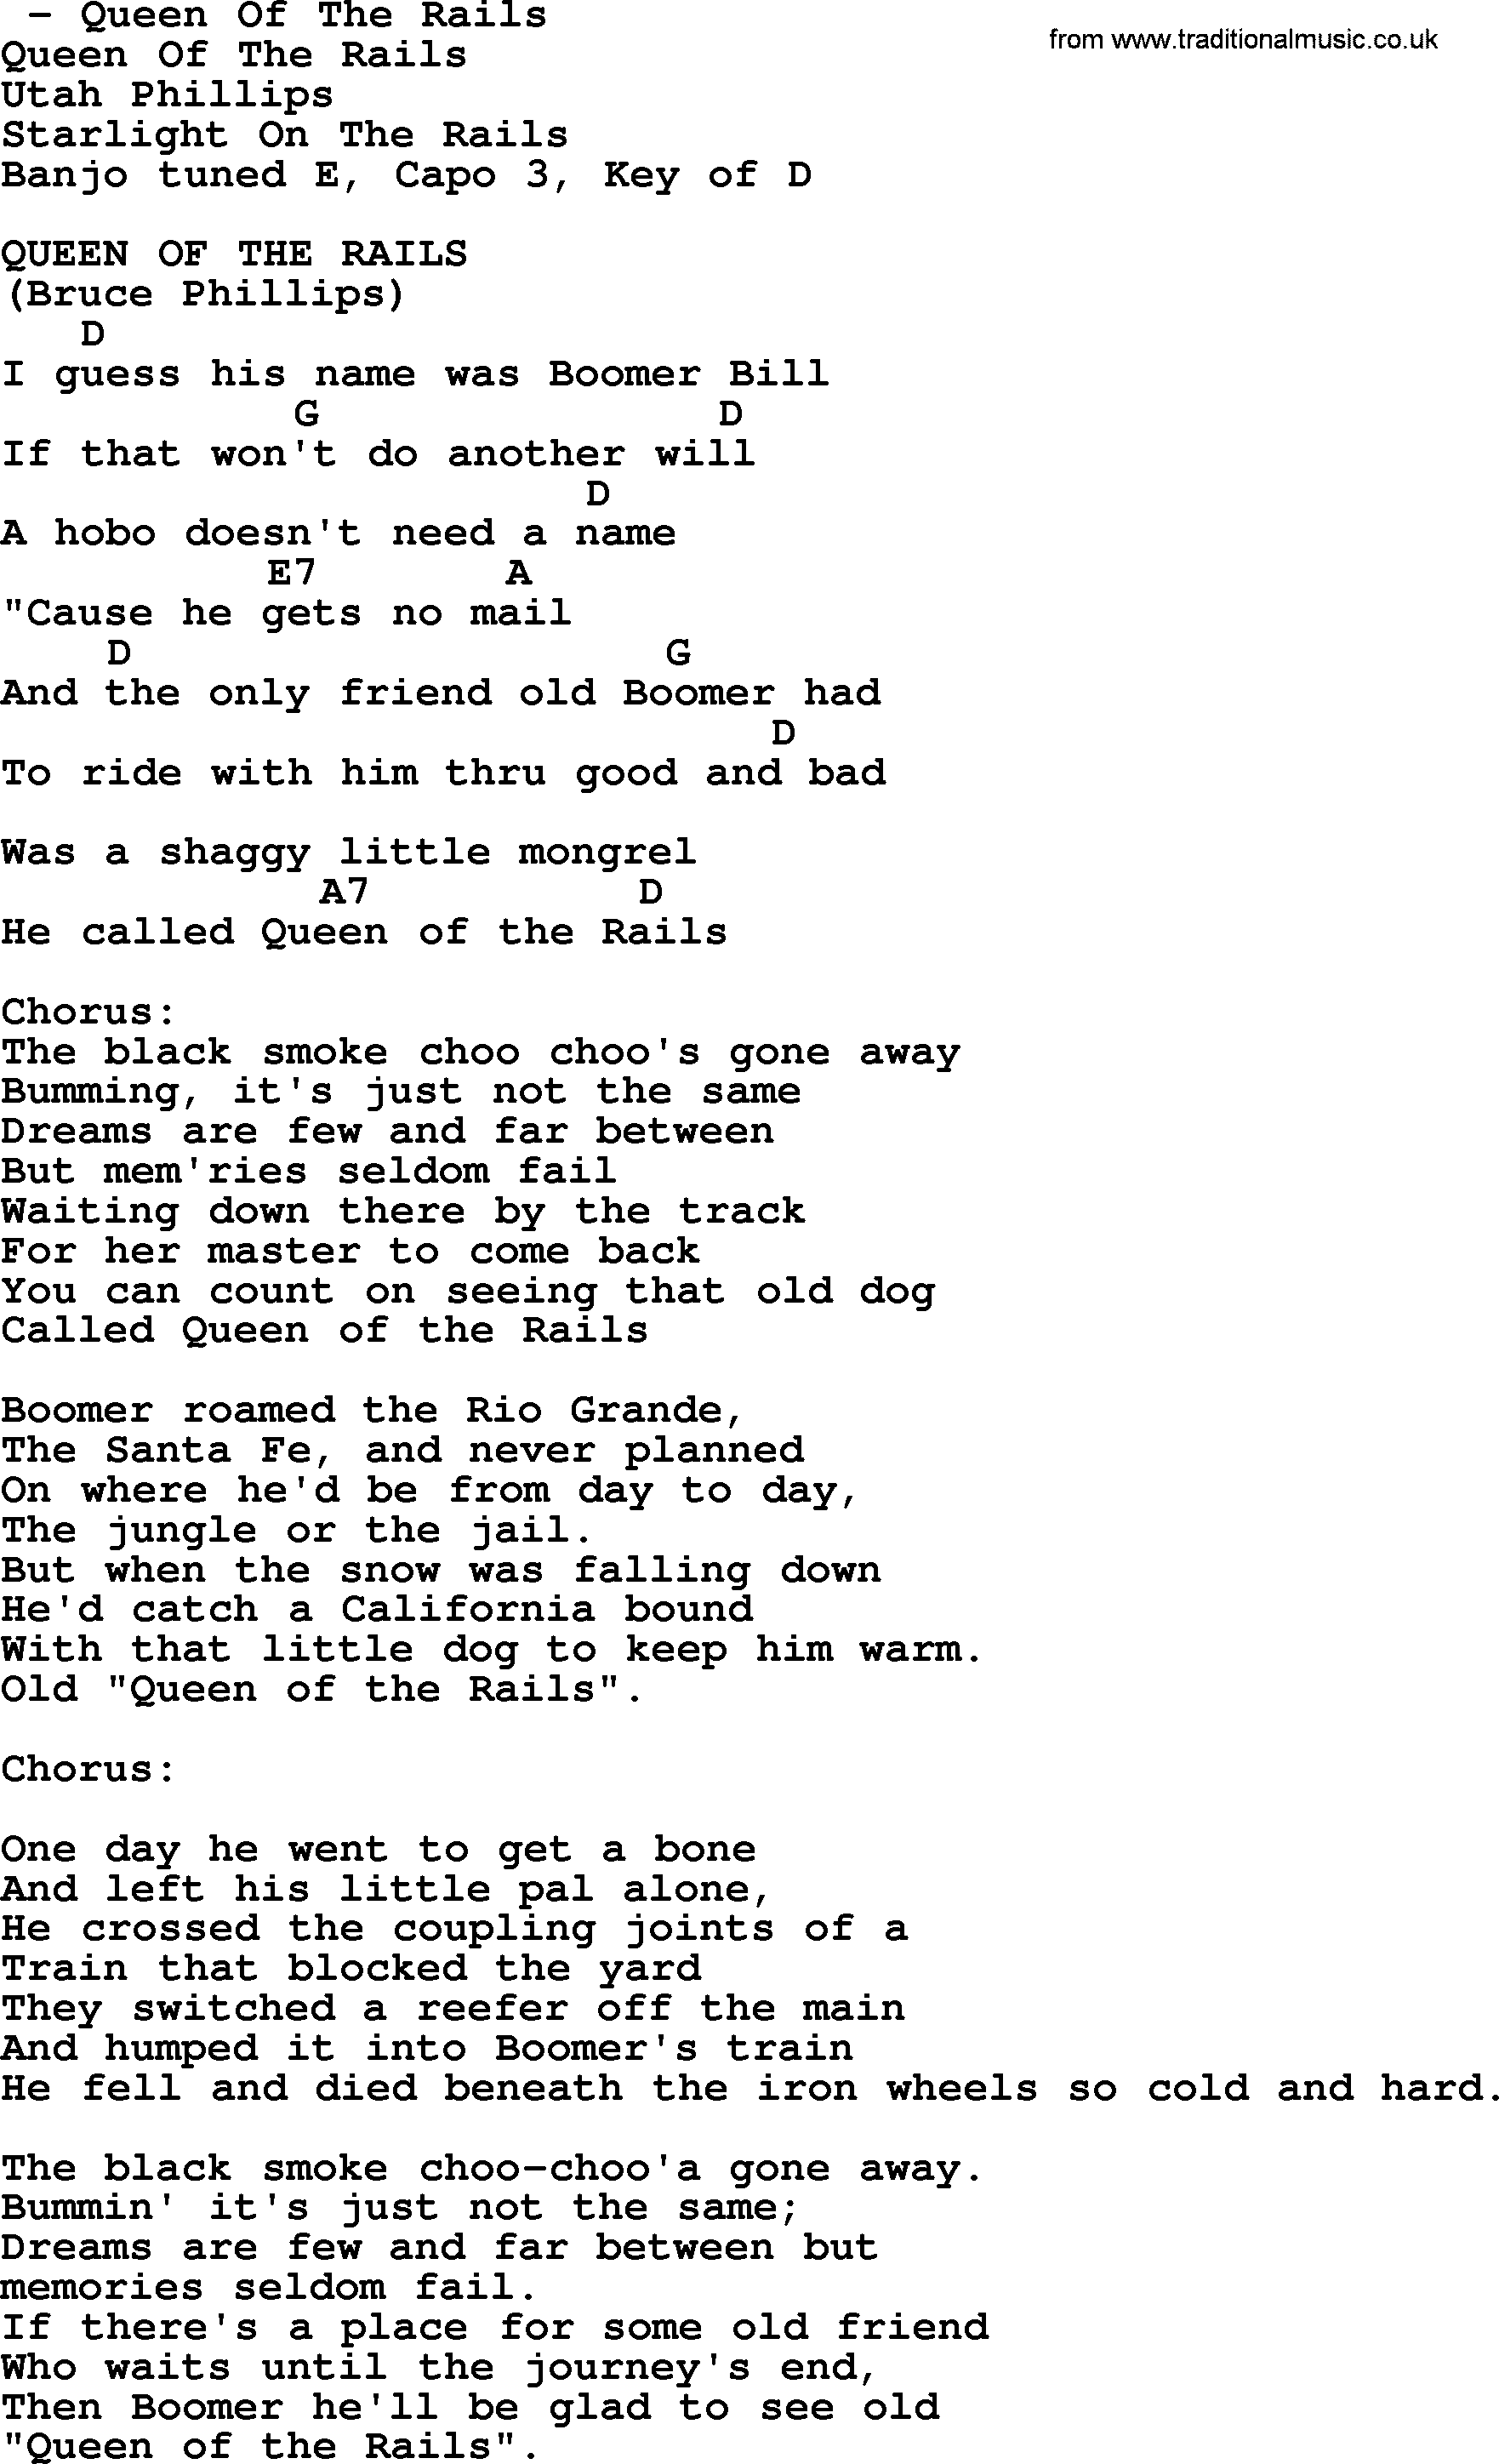 Bluegrass song: Queen Of The Rails, lyrics and chords